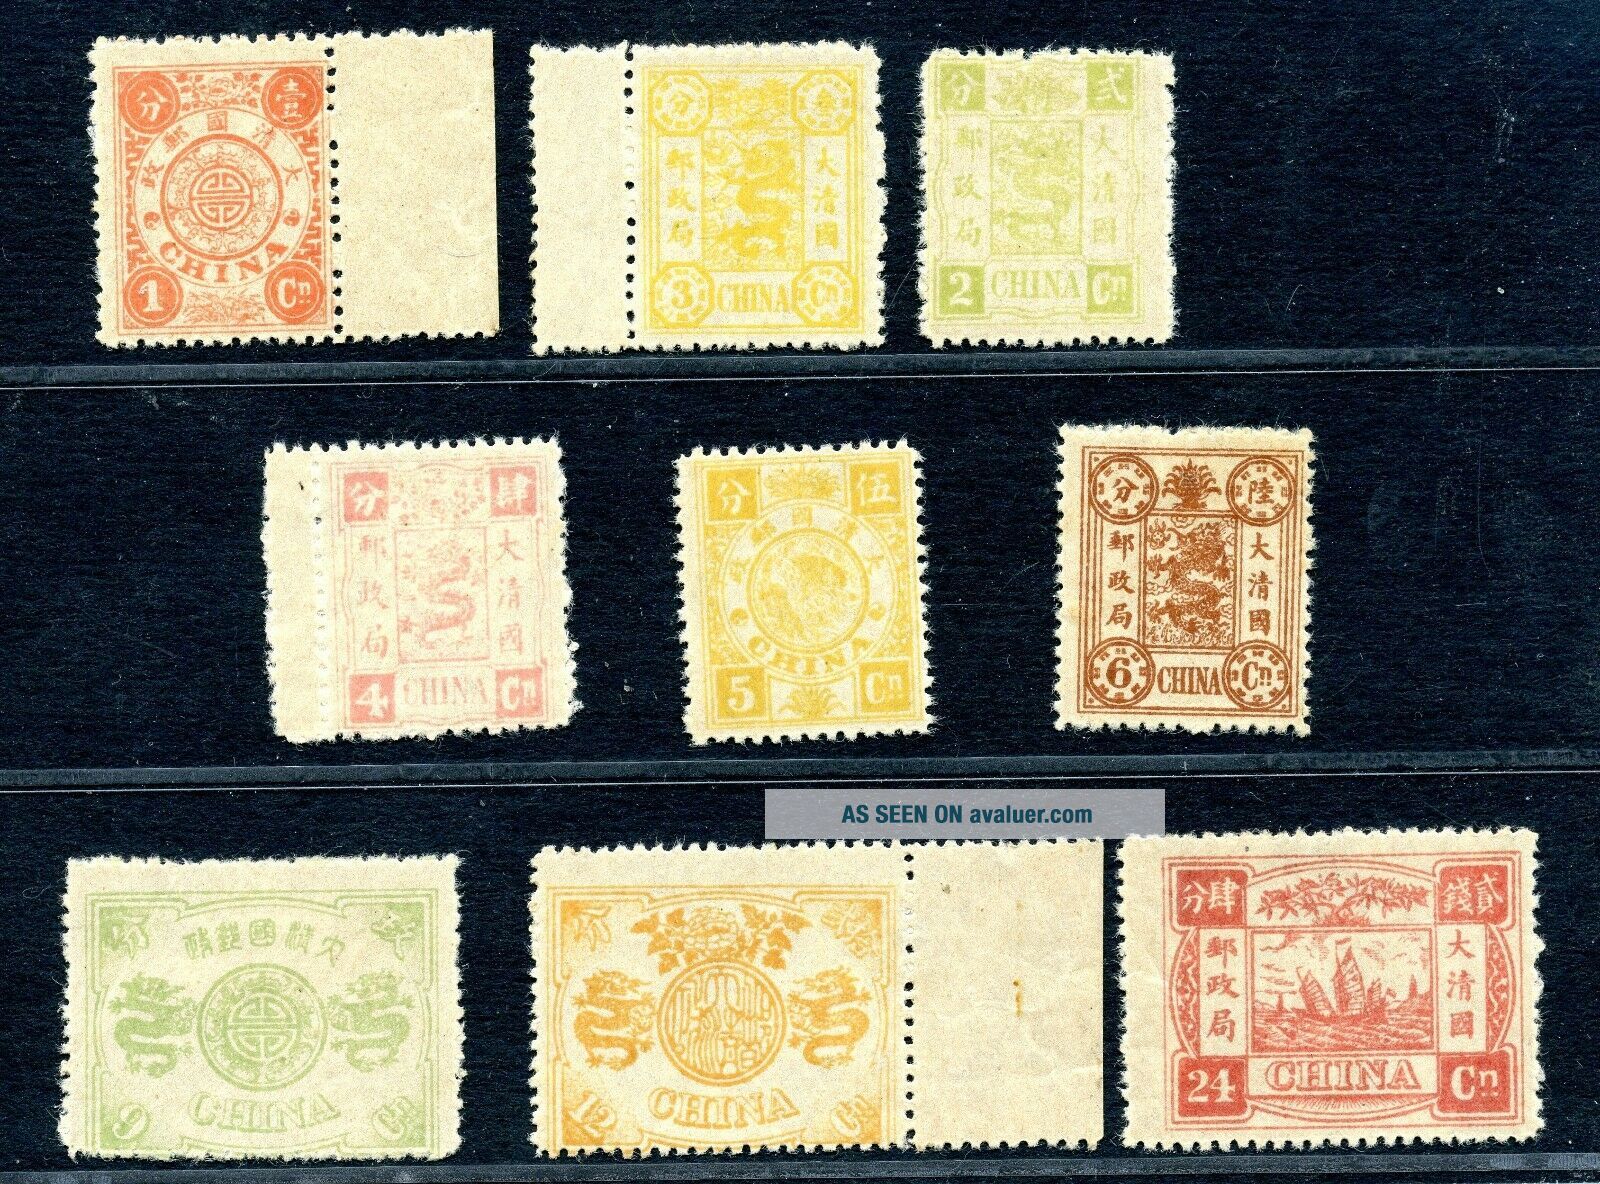 1894 Mollendorf Dowager complete set Extremely fresh